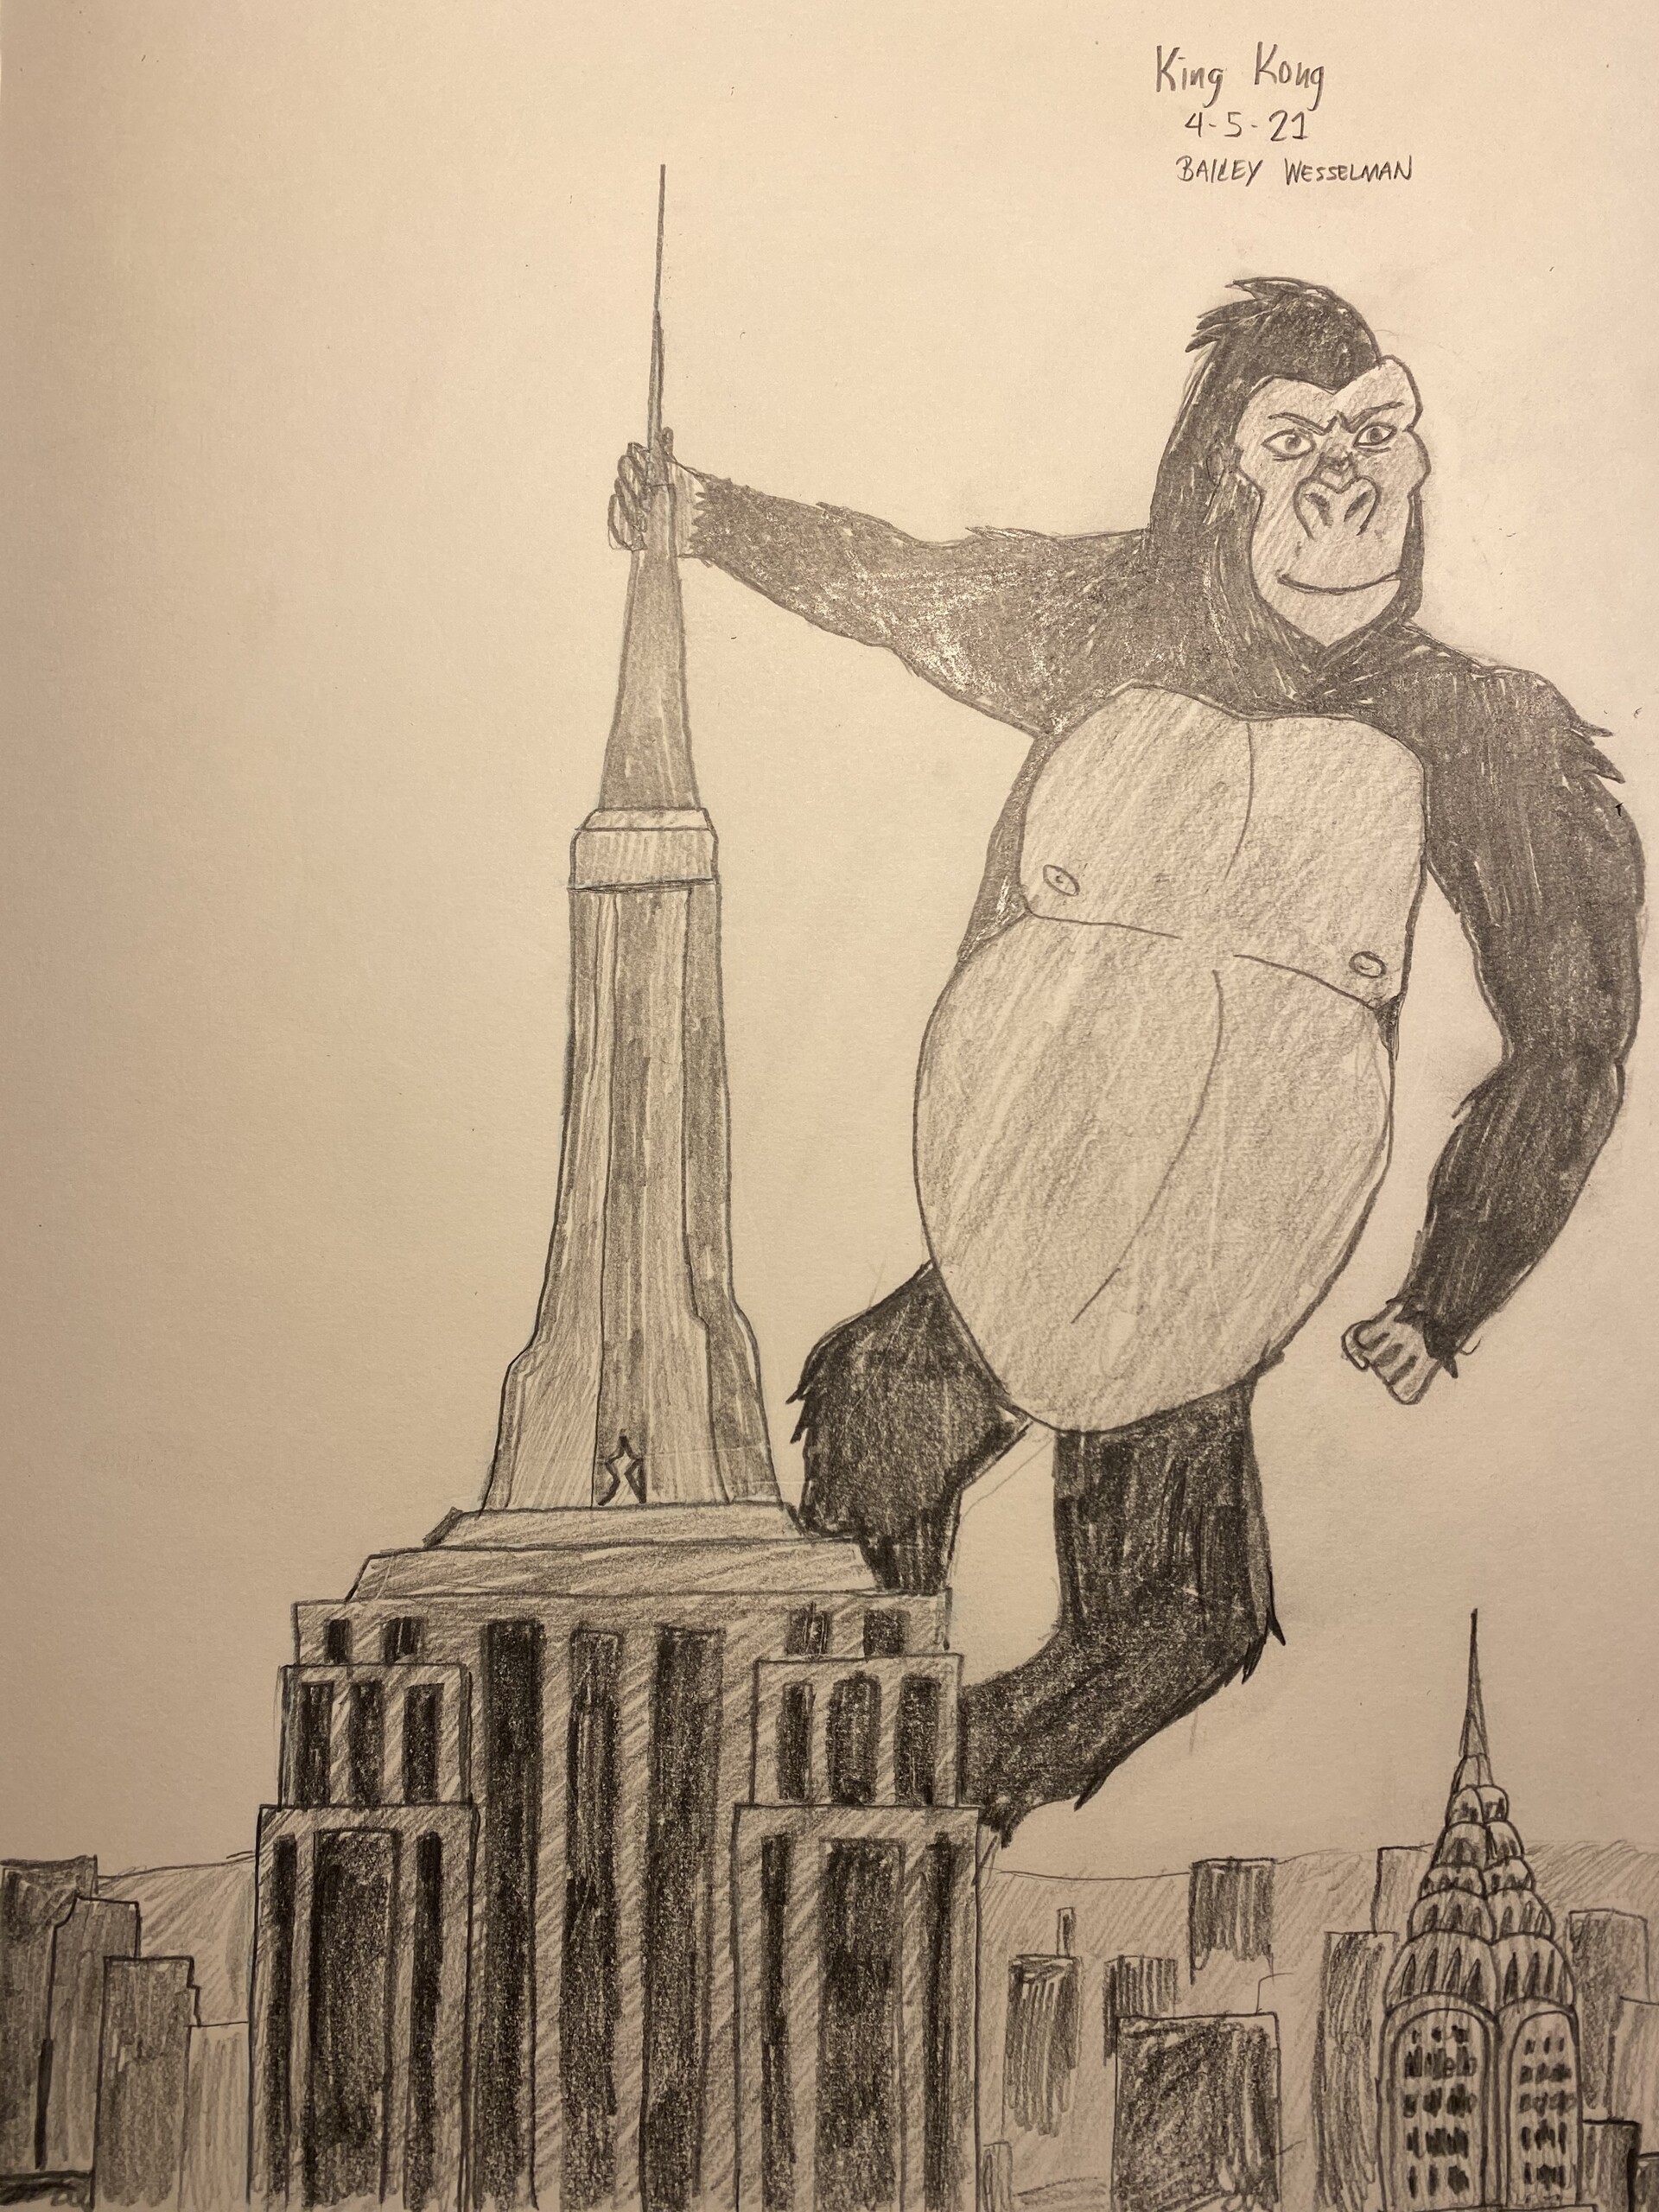 How to Draw King Kong for Kids | King Kong Drawing Easy - YouTube